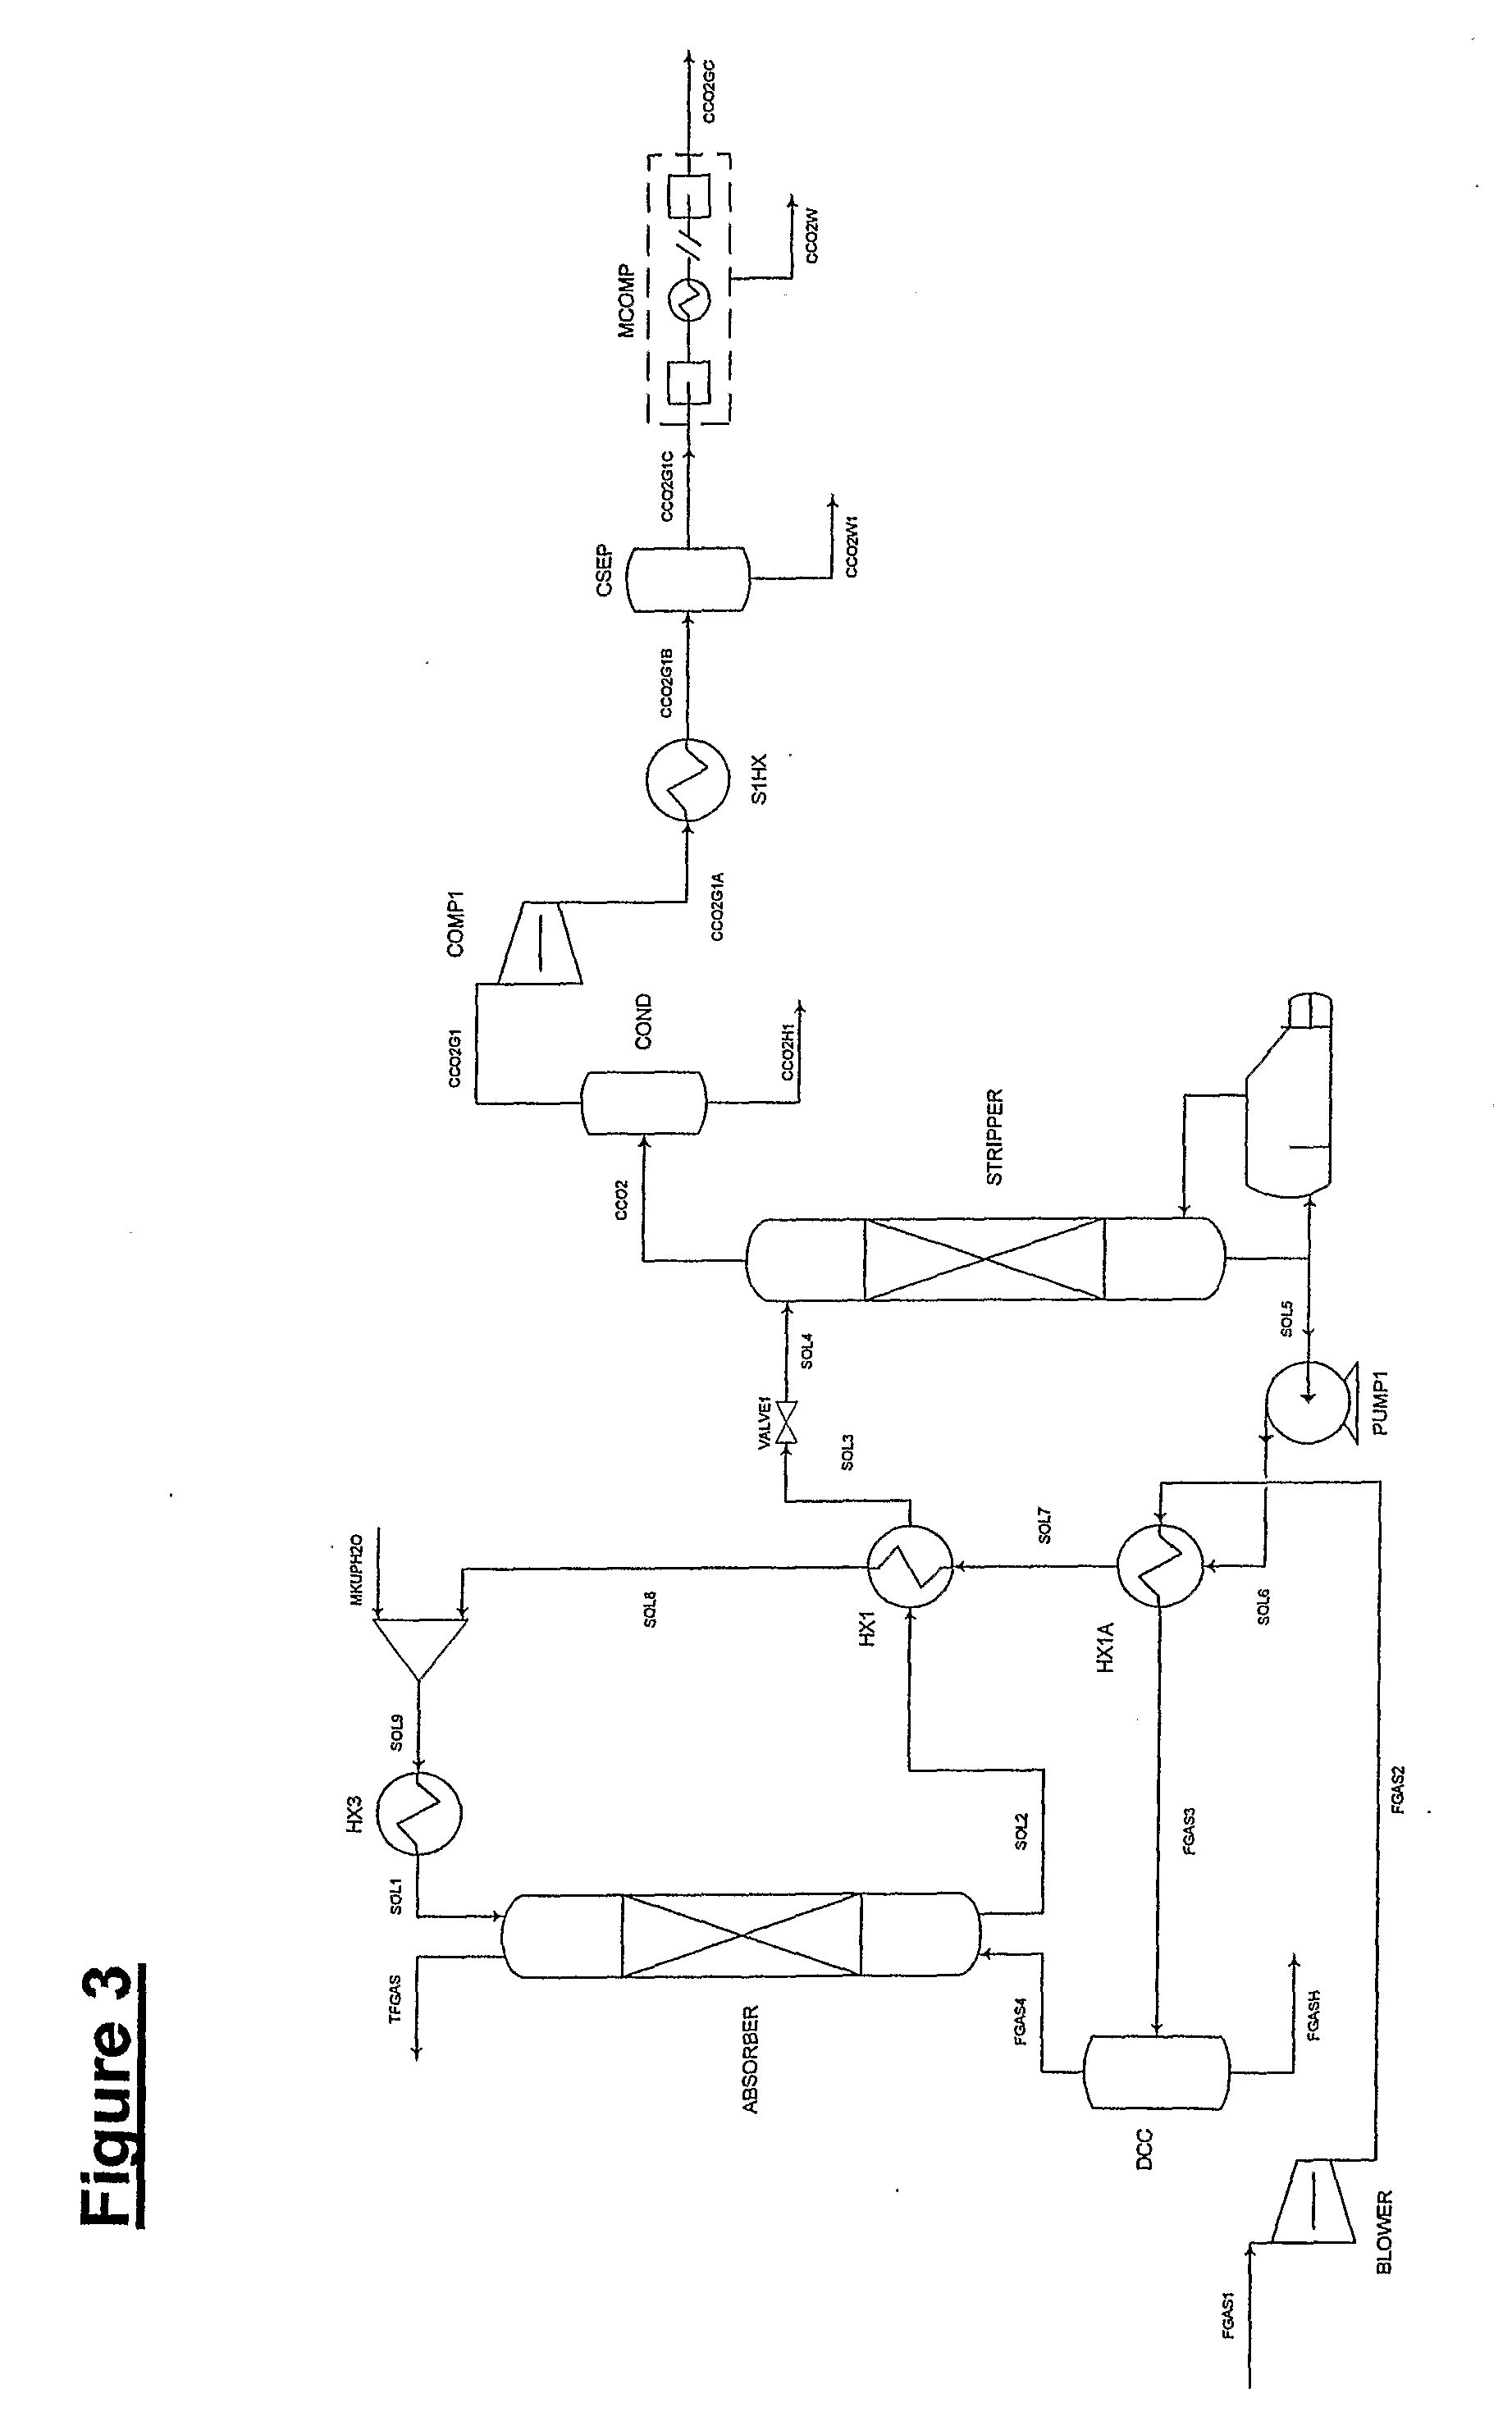 Plant And Process For Removing Carbon Dioxide From Gas Streams